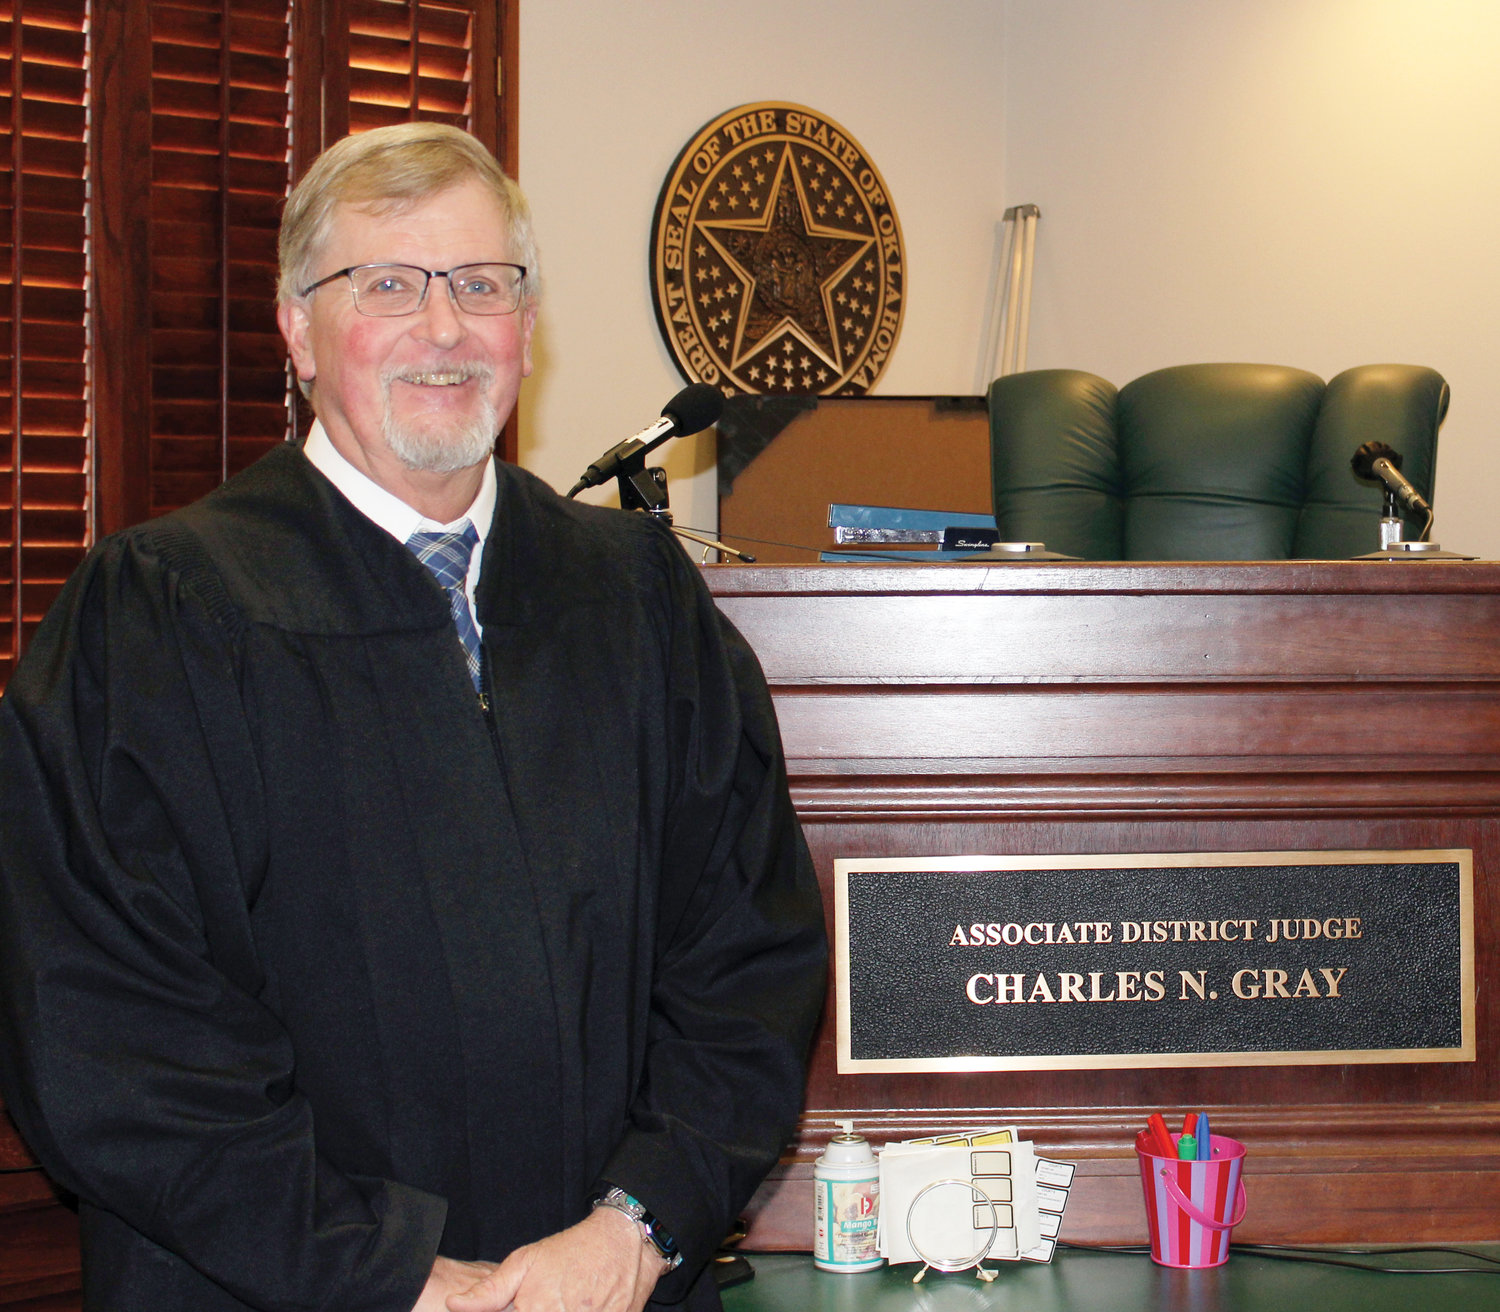 Charles Gray has held the position of associate district judge in McClain County since 2006. He first won the seat by what was then the closest race in McClain County. On a recount his 24-vote lead increased to 27 votes.